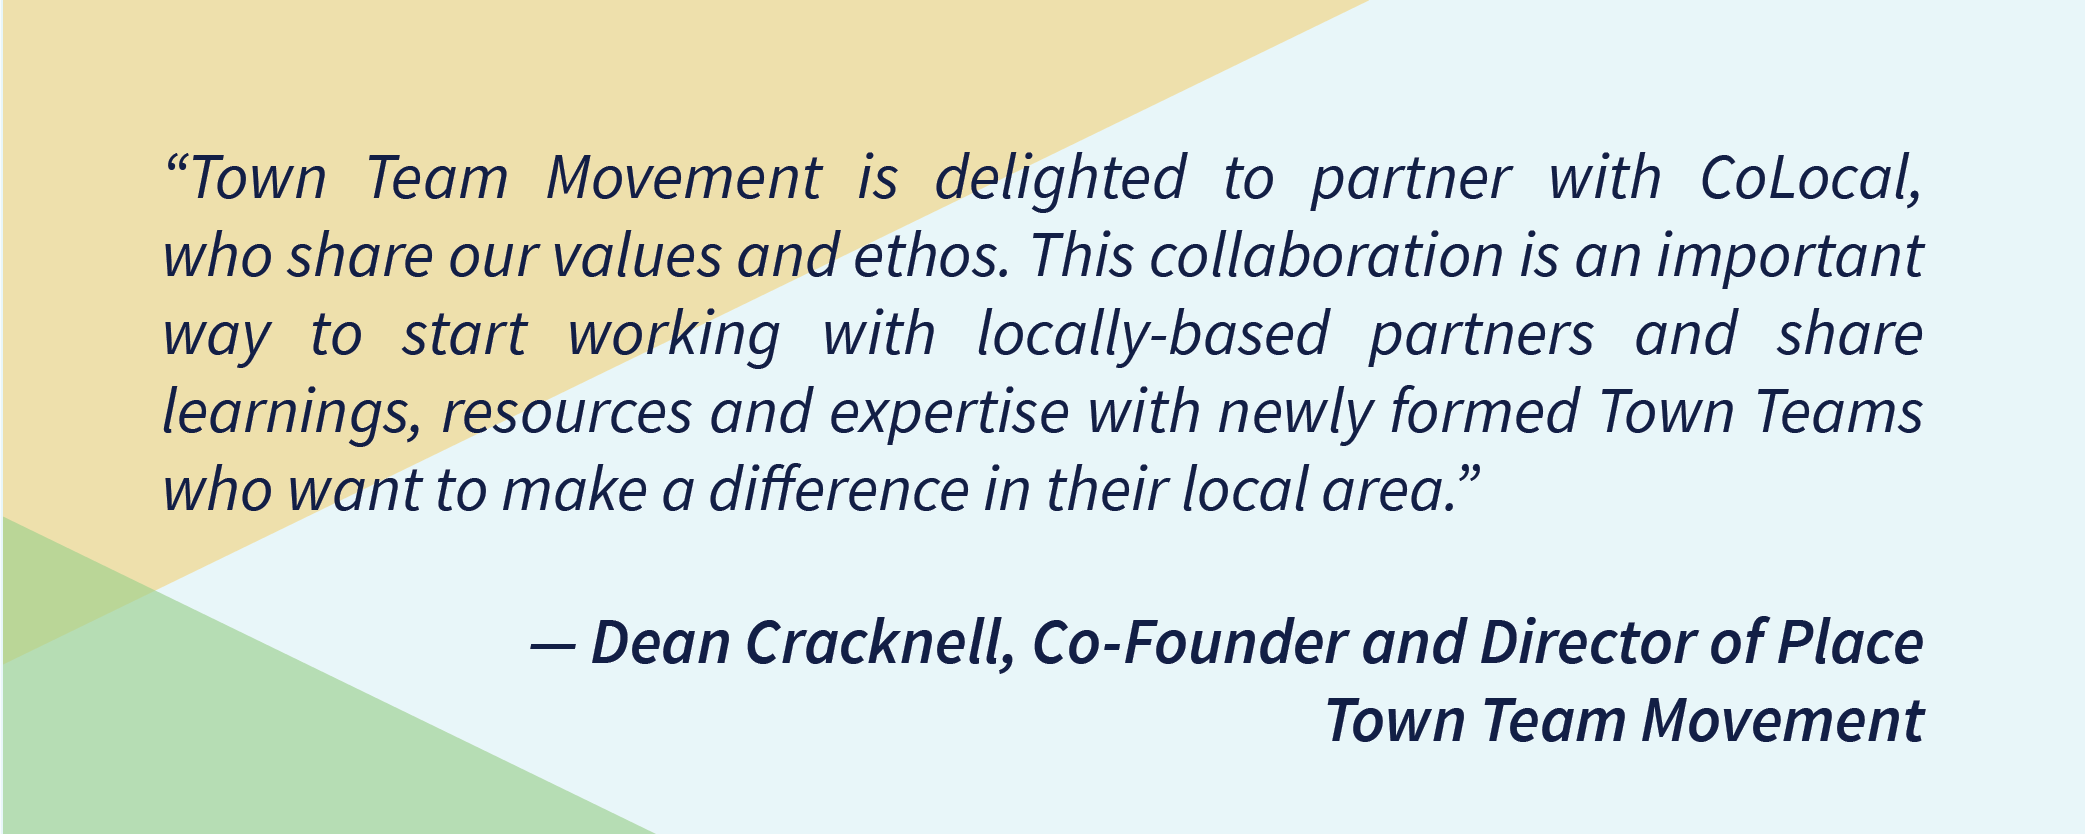 “Town Team Movement is delighted to partner with CoLocal, who share our values and ethos. This collaboration is an important way to start working with locally-based partners and share learnings, resources and expertise with newly formed Town Teams who want to make a difference in their local area” — Dean Cracknell, Co-Founder and Director of Place -Town Team Movement